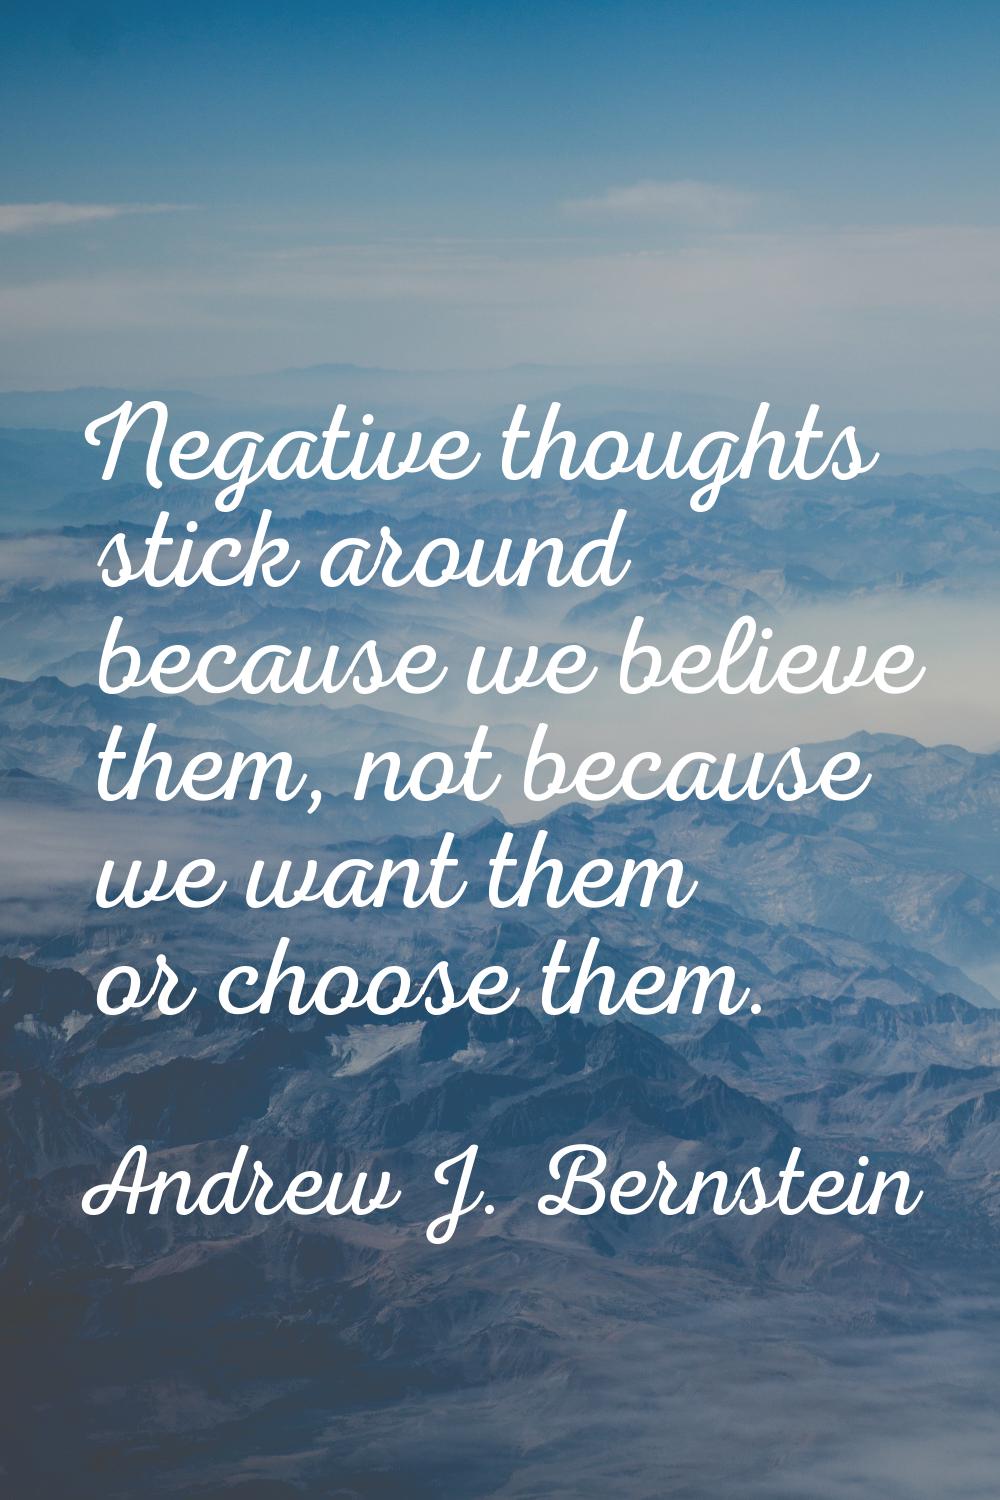 Negative thoughts stick around because we believe them, not because we want them or choose them.